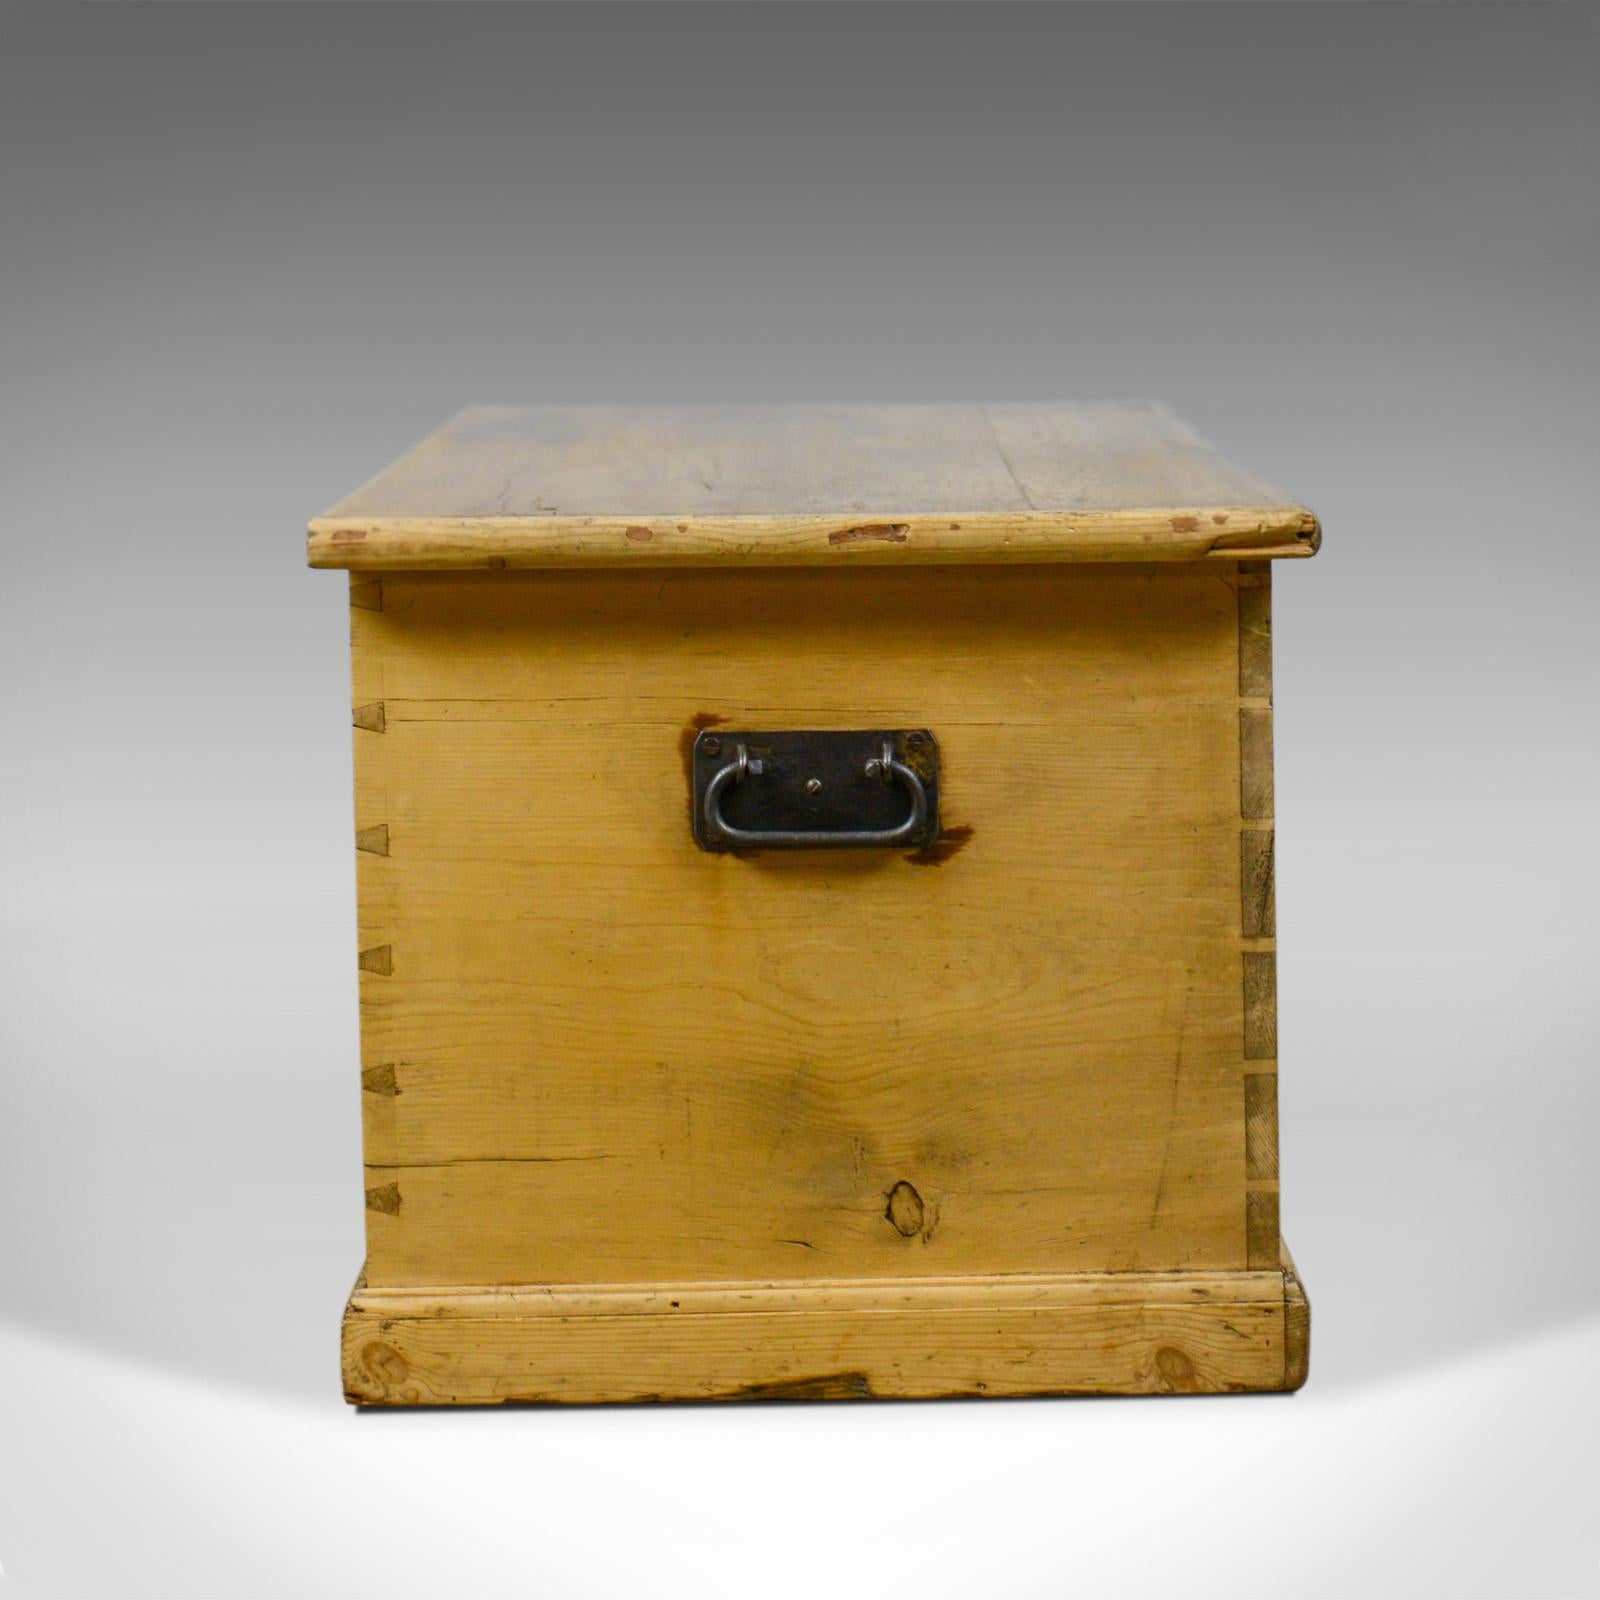 English Antique Pine Trunk, Victorian, Blanket Chest, Box Early 20th Century, circa 1900